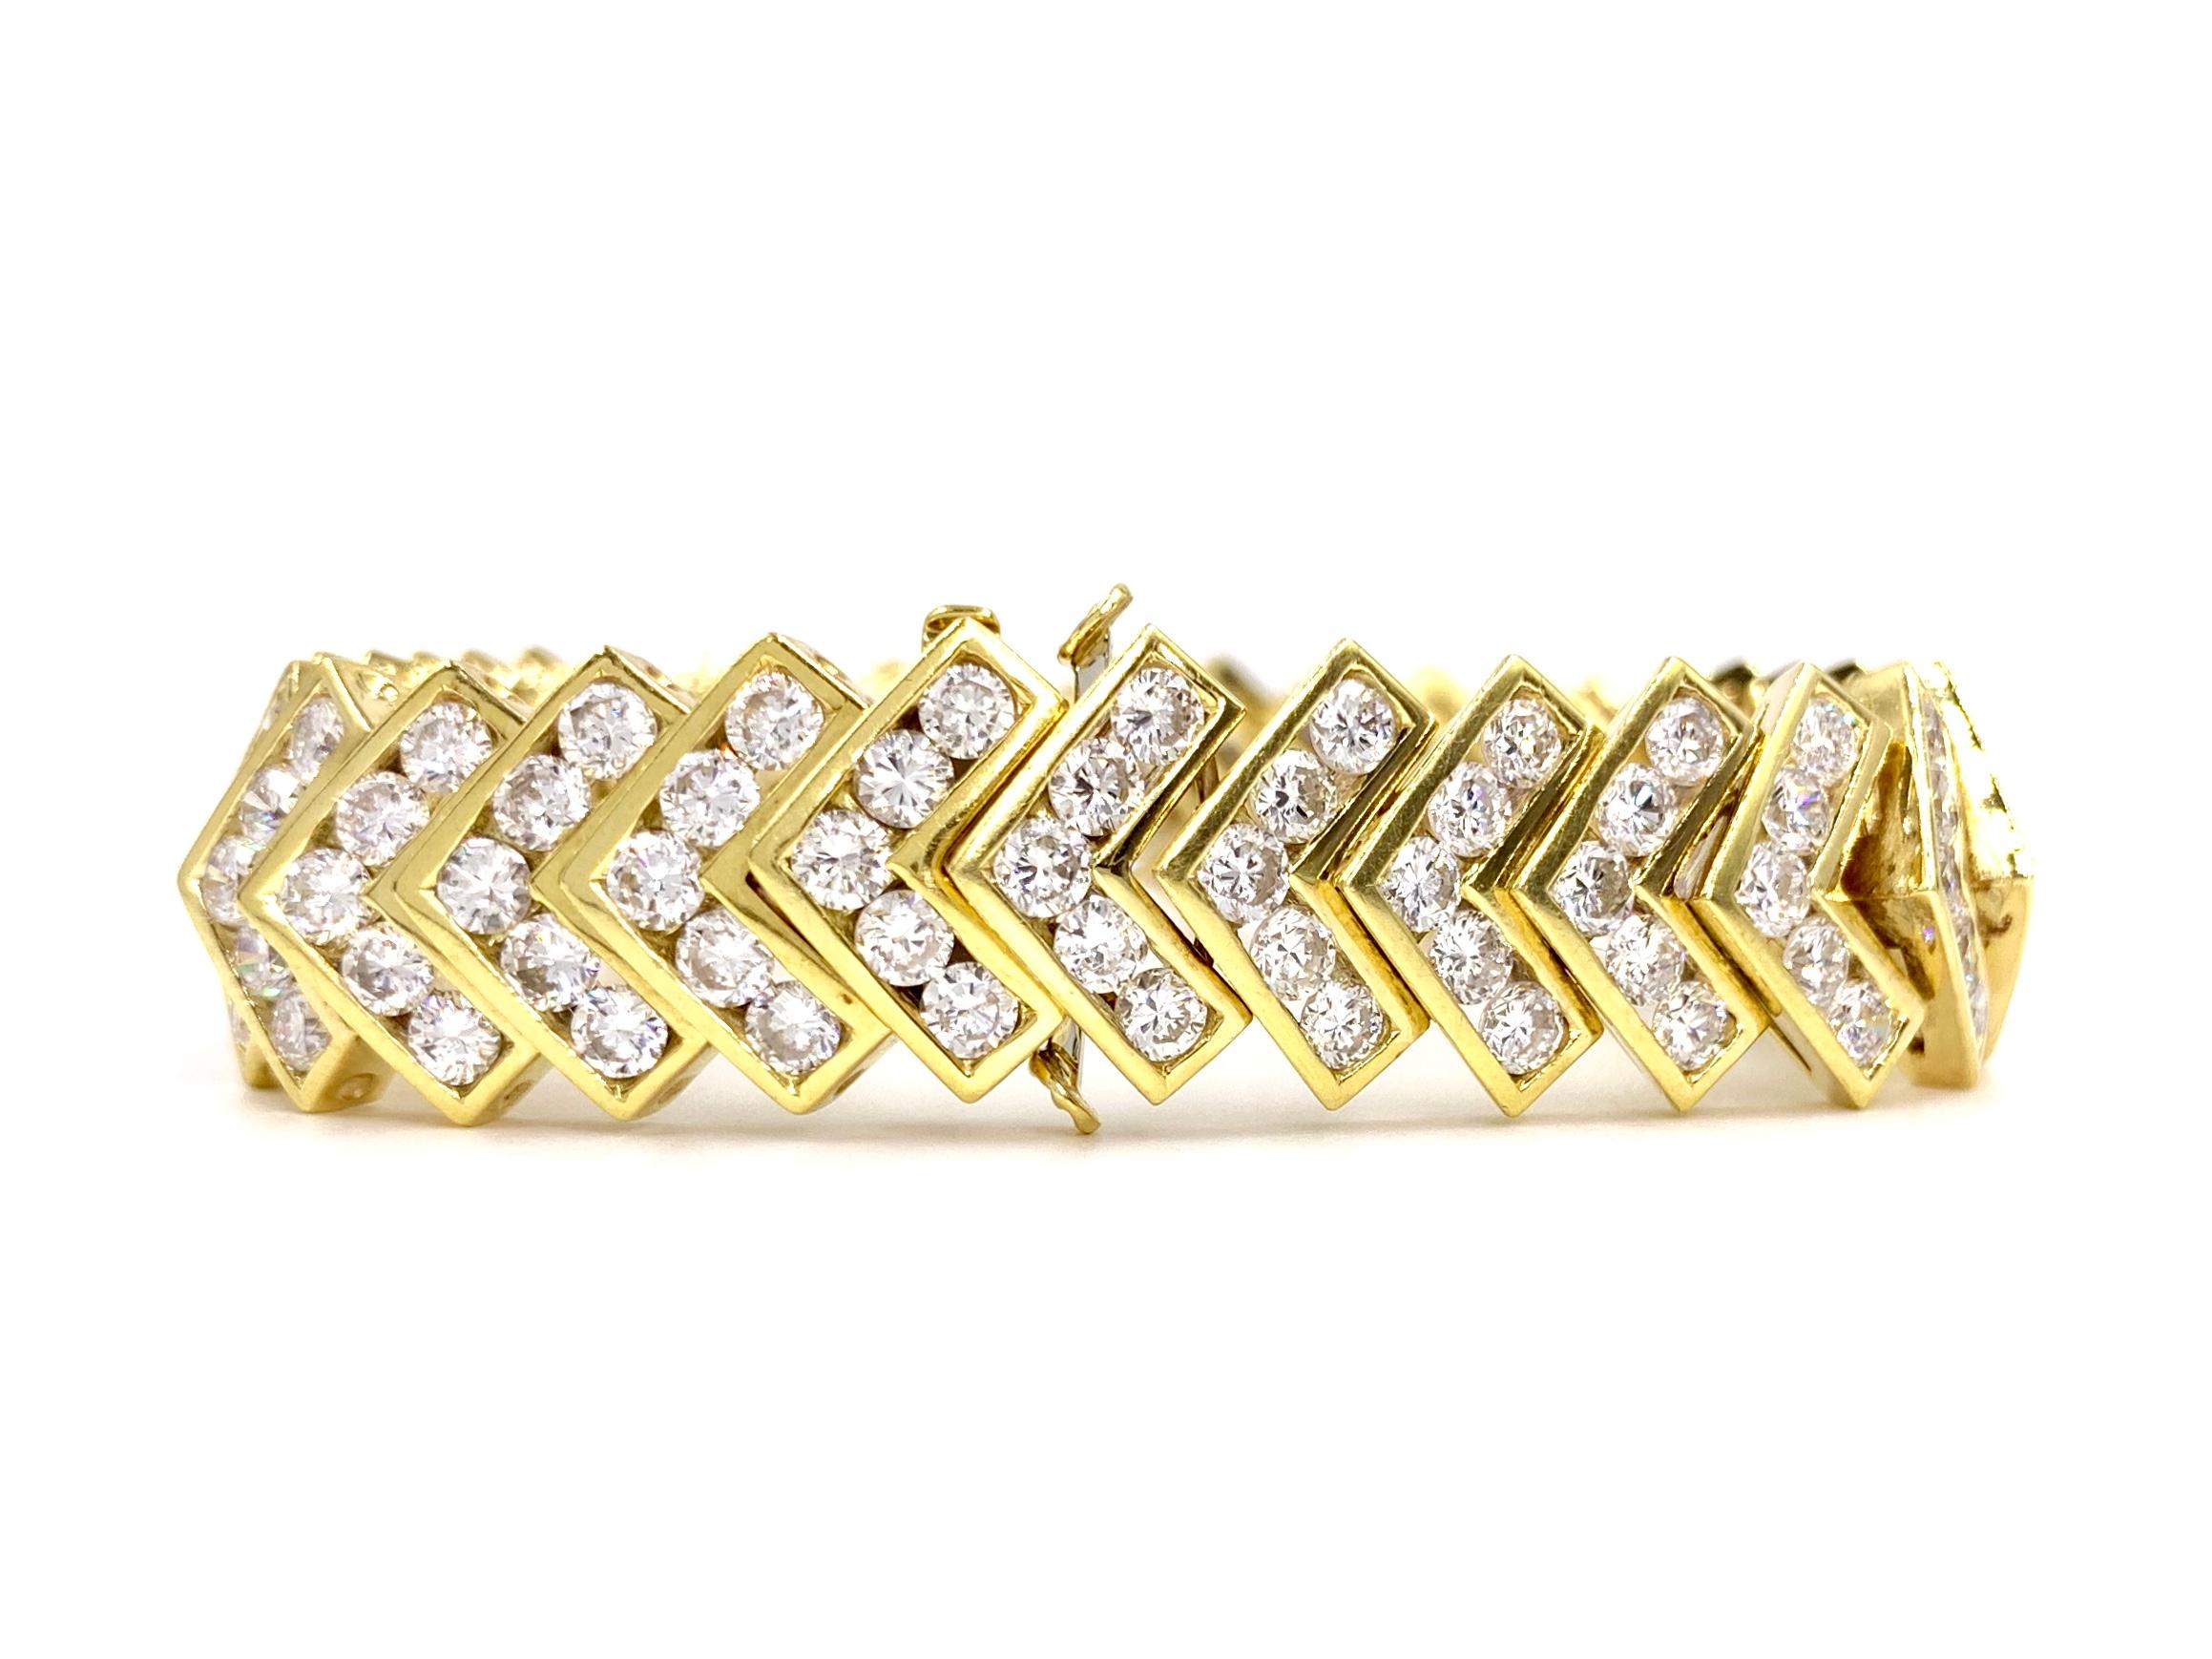 Stylish and sleek 18 karat yellow gold modern diamond bracelet with 170 round brilliant diamonds at 14.20 carats total weight. Diamonds are arranged in a contemporary chevron shape, securely set in smooth polished channels. Brilliant diamonds are